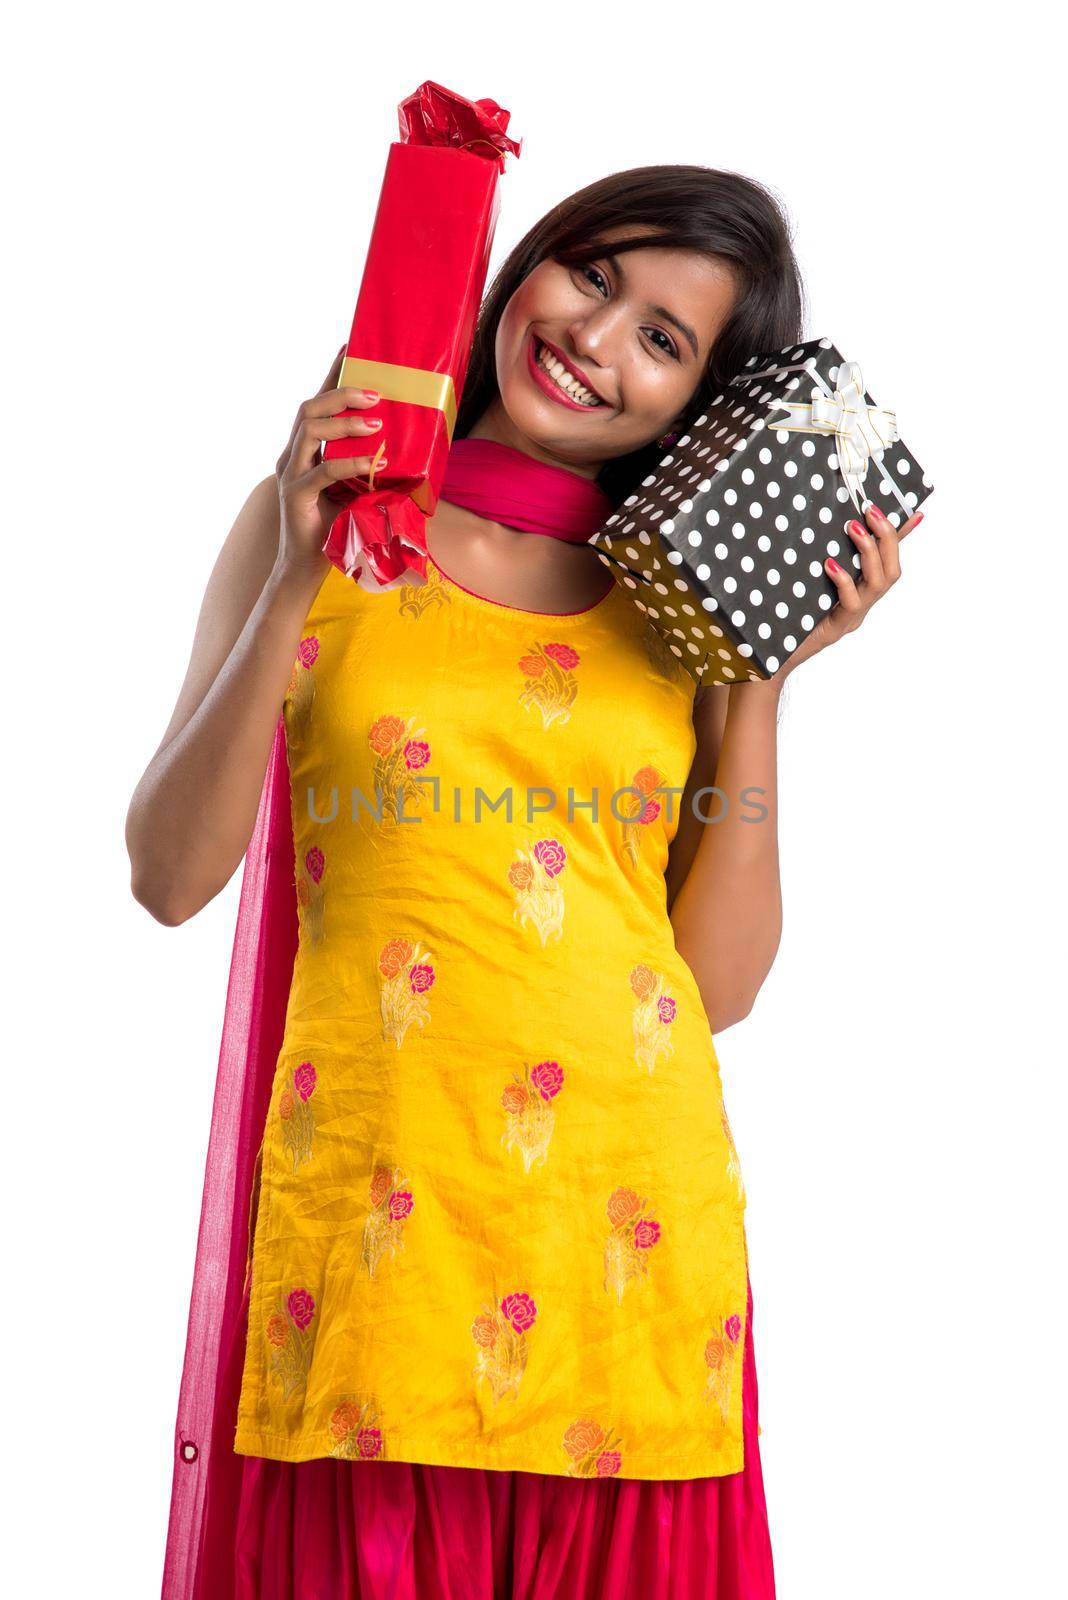 Portrait of young happy smiling Indian Girl holding gift boxes on a white background. by DipakShelare